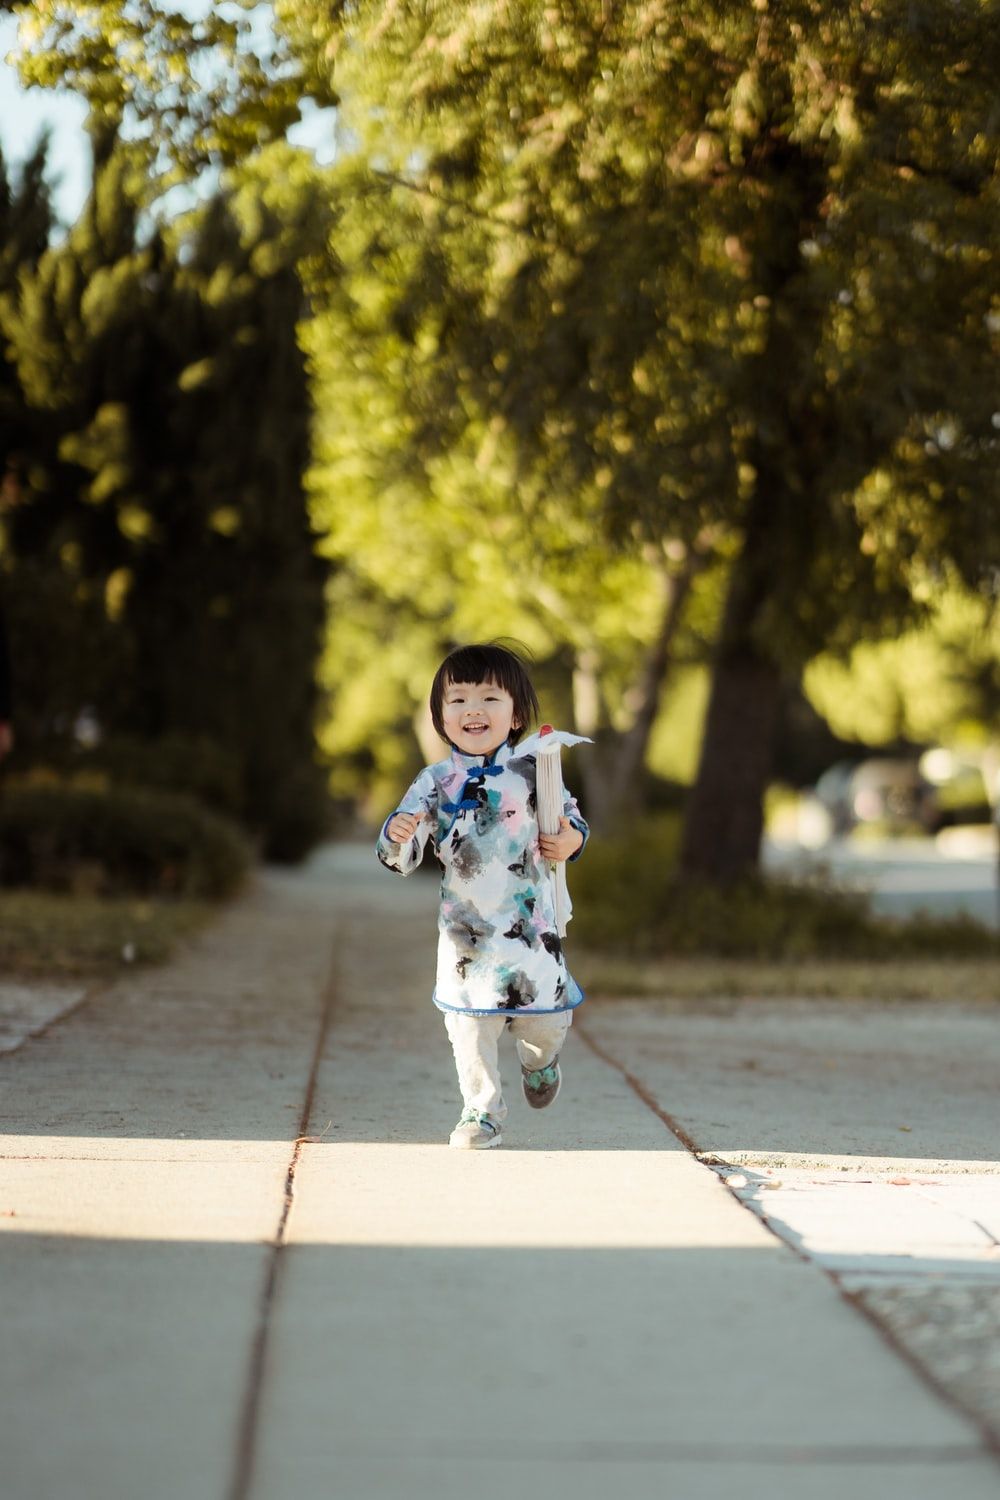 Baby Walking Picture. Download Free Image